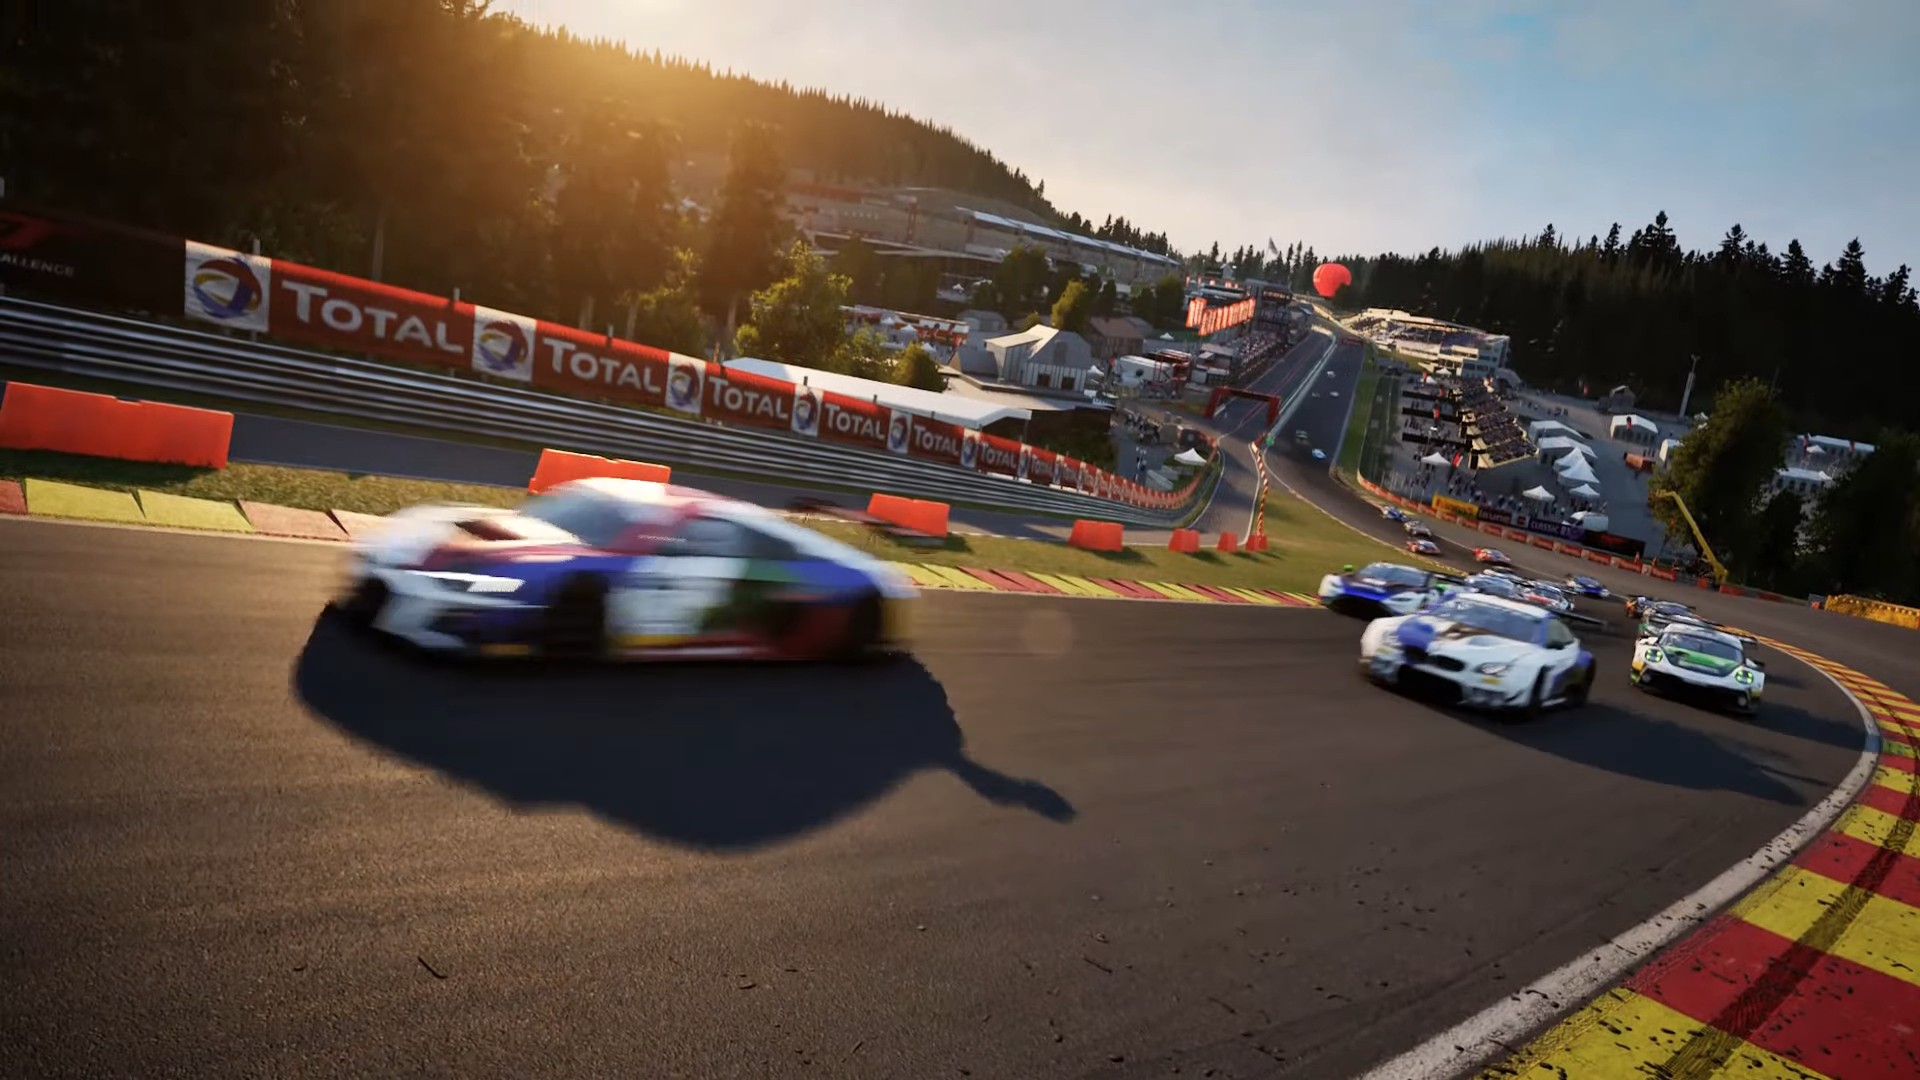 Racing Sim Assetto Corsa Competizione Finally Arrives on PS5 and Xbox  Series X/S - autoevolution